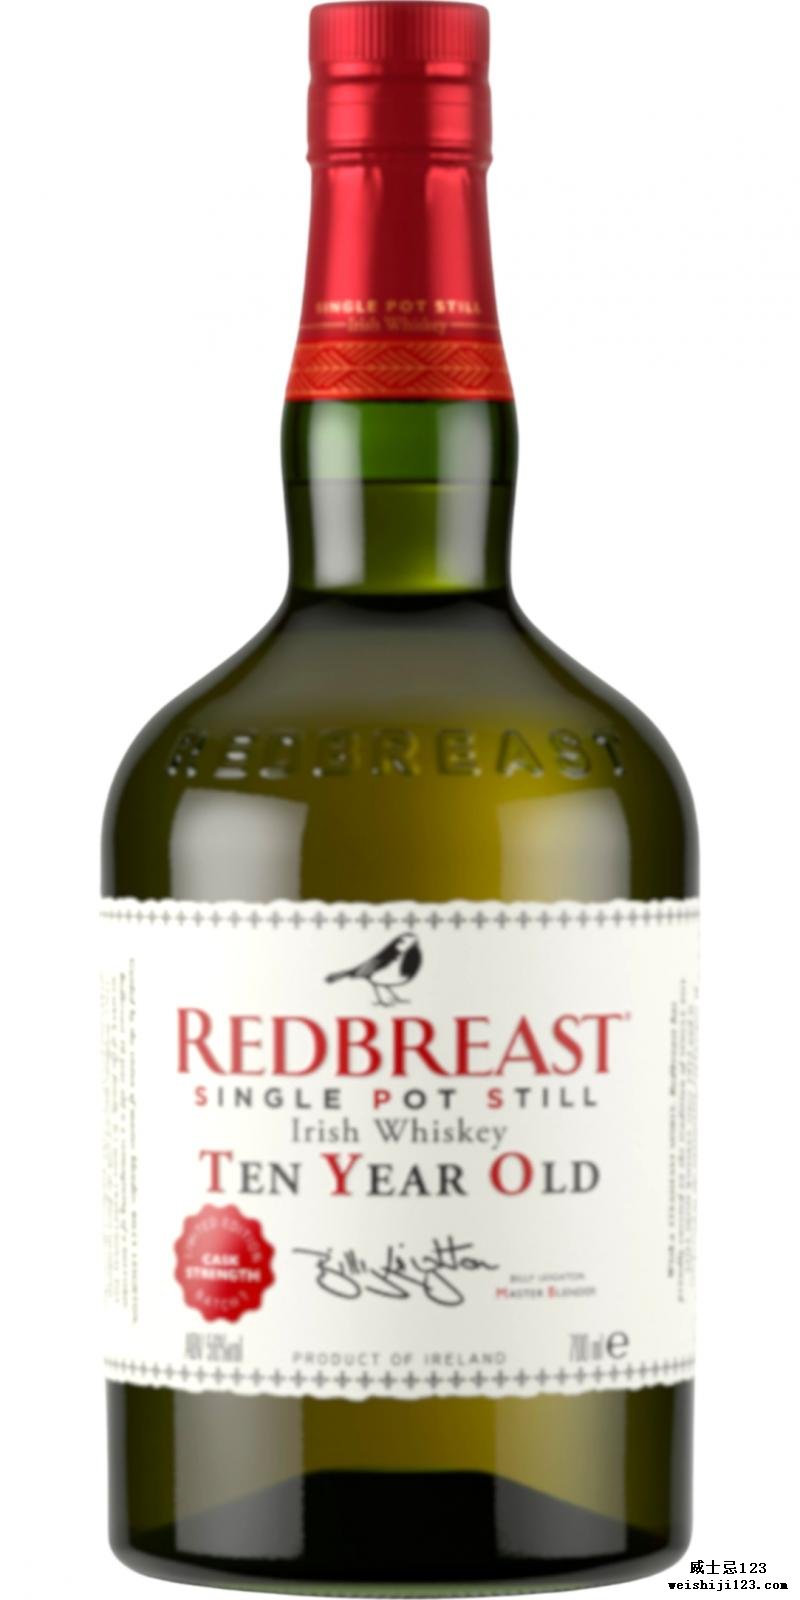 Redbreast 10-year-old